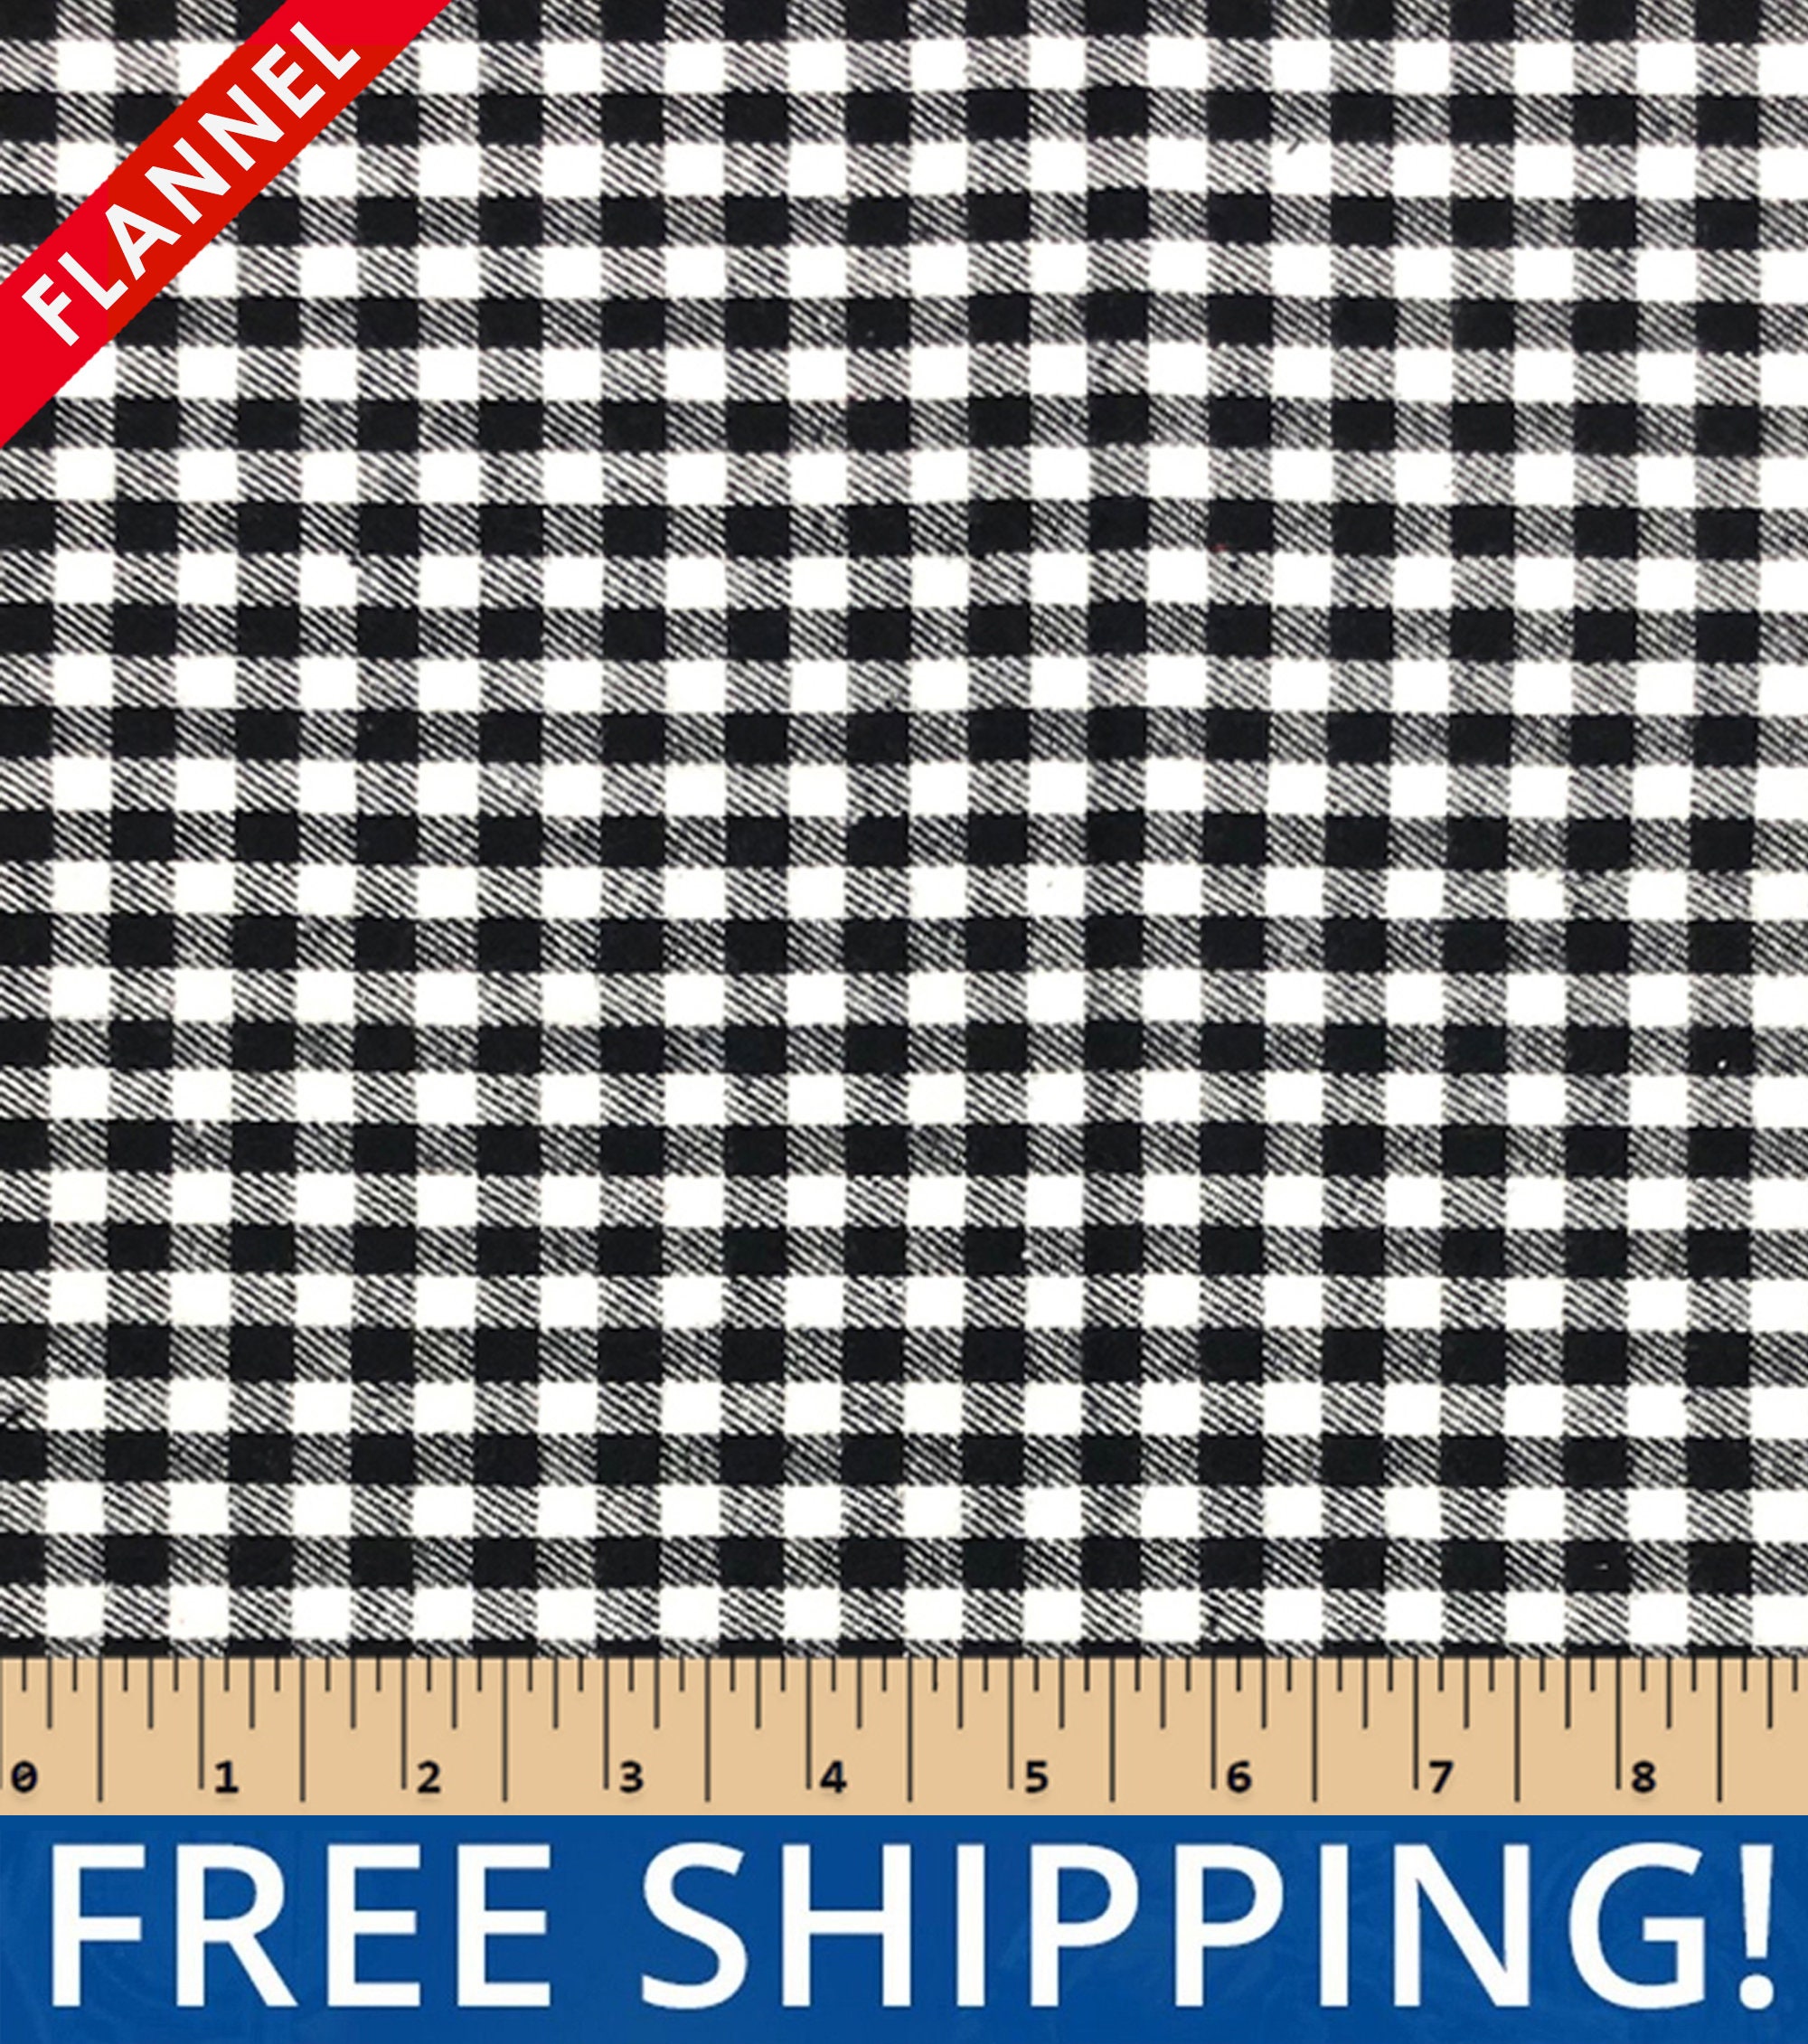 Pico Textiles 1 Yard - 100% Cotton Tartan Plaid Flannel Fabric - Sold by The Yard - Ideal for Shirts, Scarves, Pajamas & Blankets